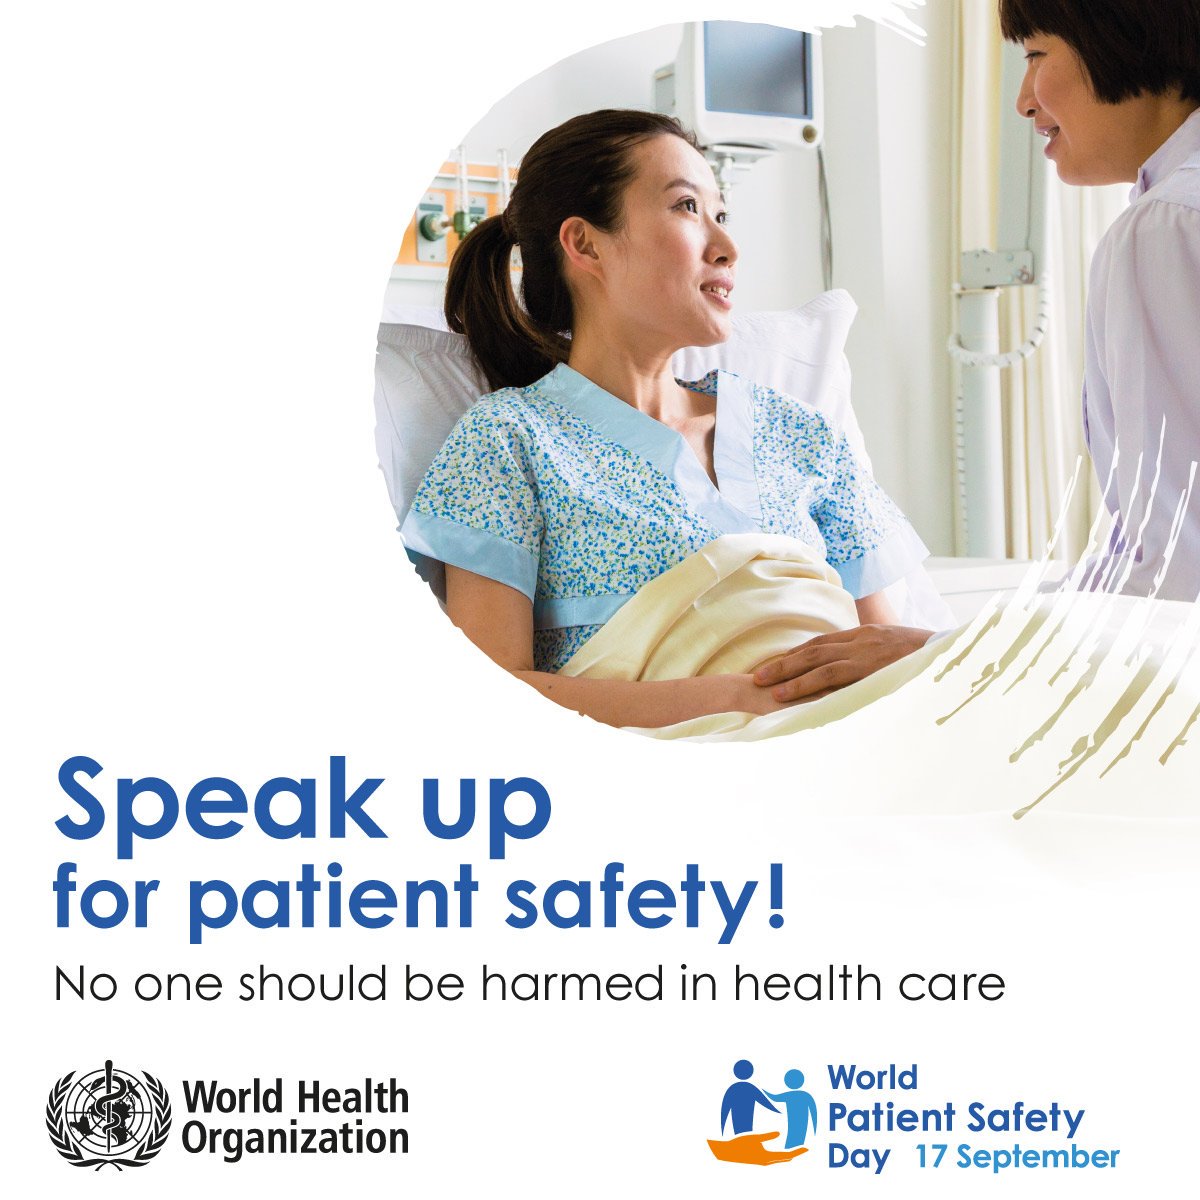 Every day patients die world wide from preventable #hospitalacquiredinfections. Speak up for improved disinfection solutions.  @WHO
 #WorldPatientSafetyDay2019 #patientsafety #speakupforpatientsafety #hai #infectionprevention